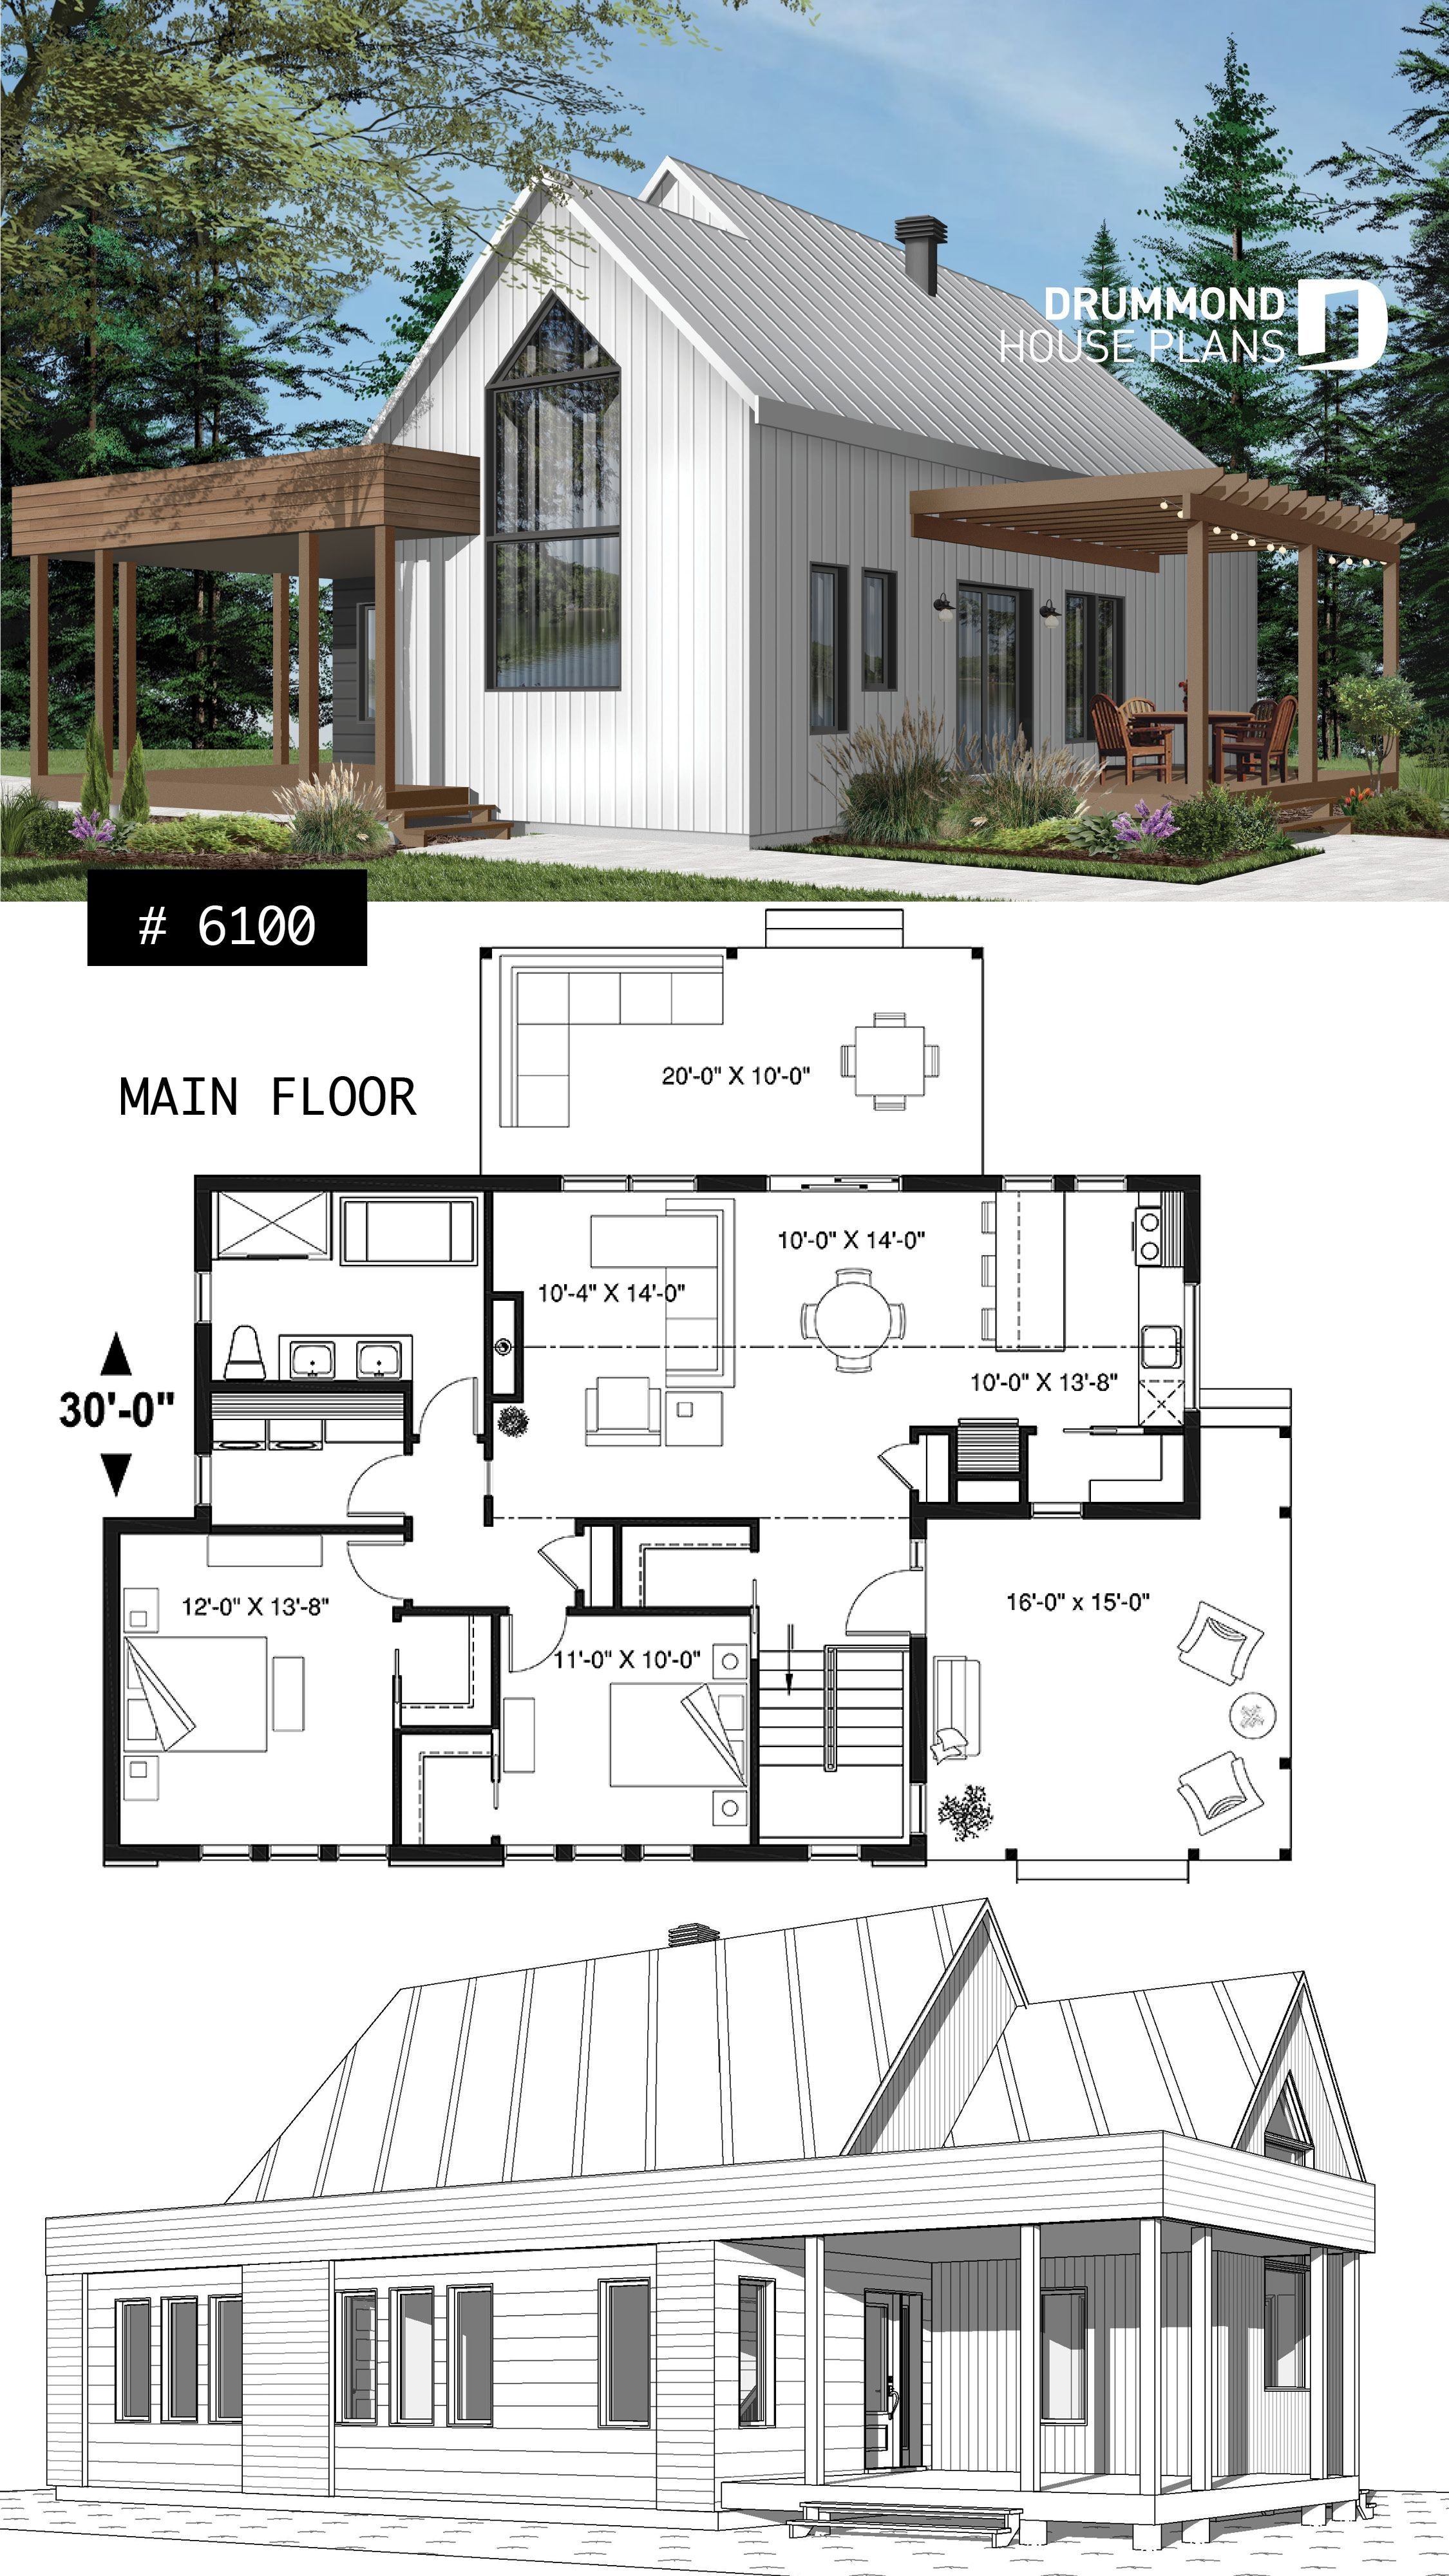 21 Open Concept Floor Plans for Small Homes Modern one